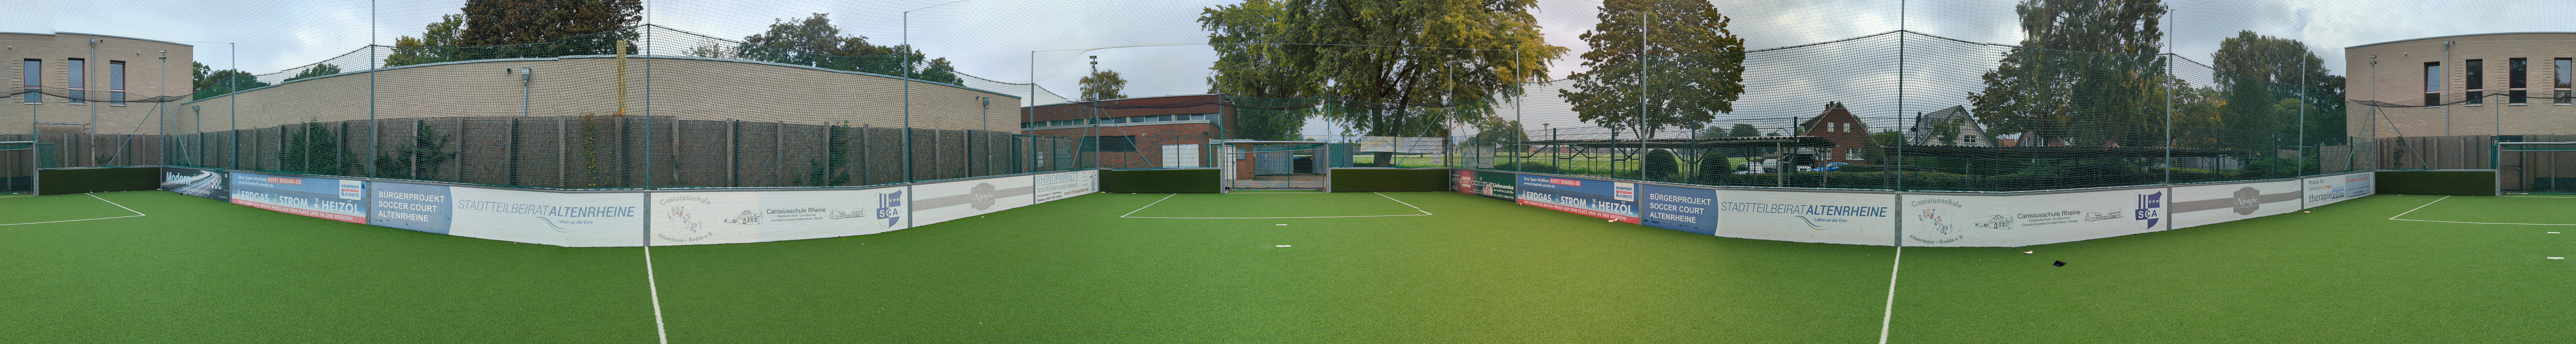 Soccer Court Photosphere